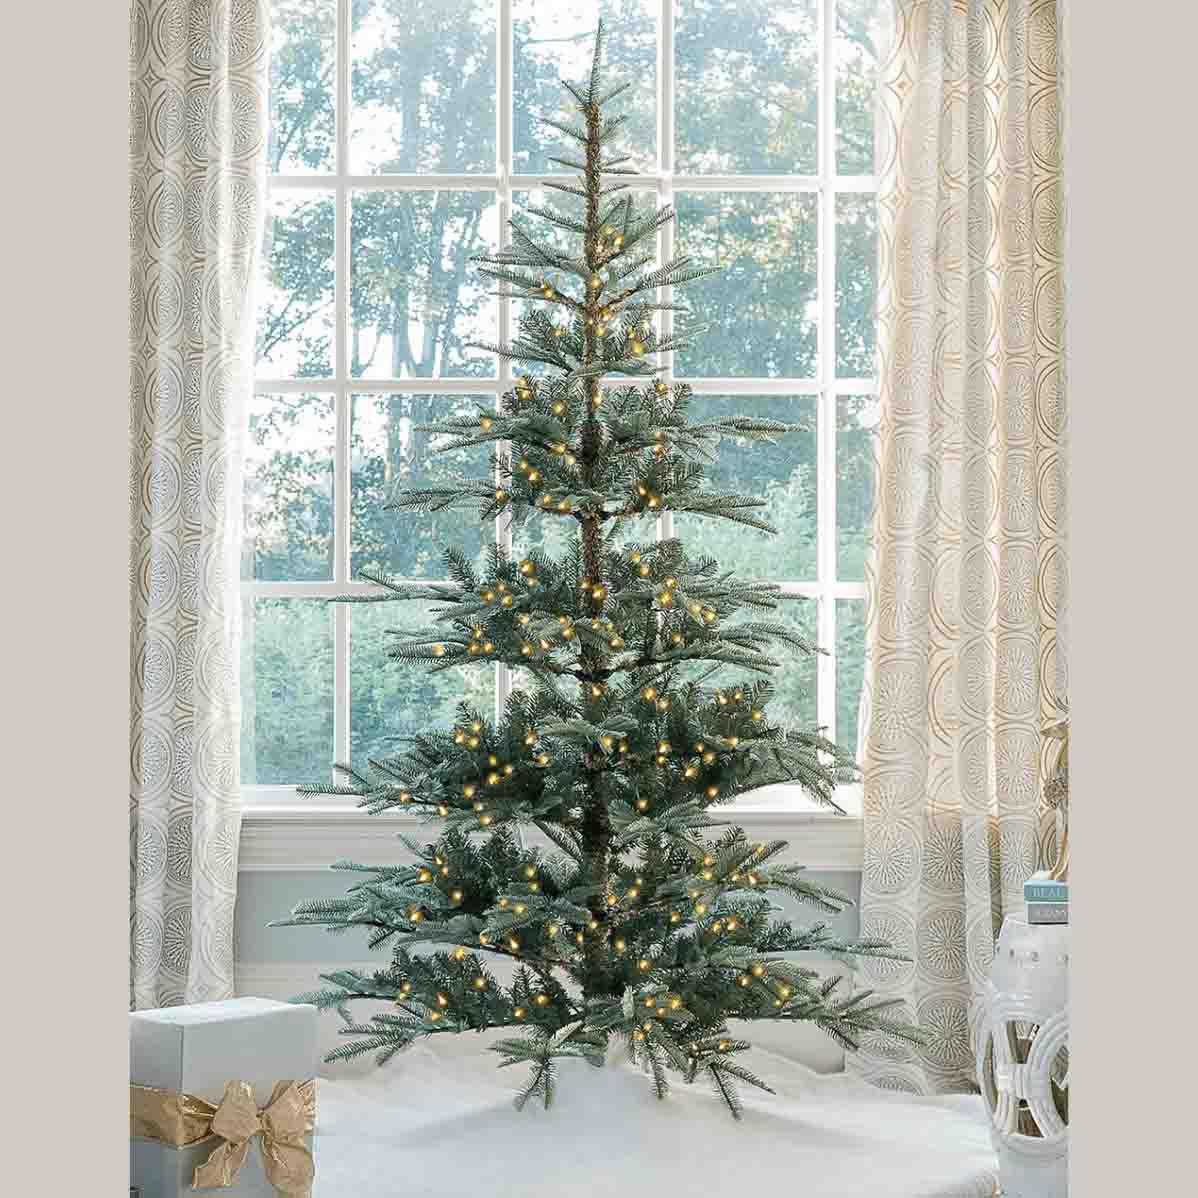 a 7 foot Noble Fir Artificial Christmas Tree with 500 warm white LED lights in a living room